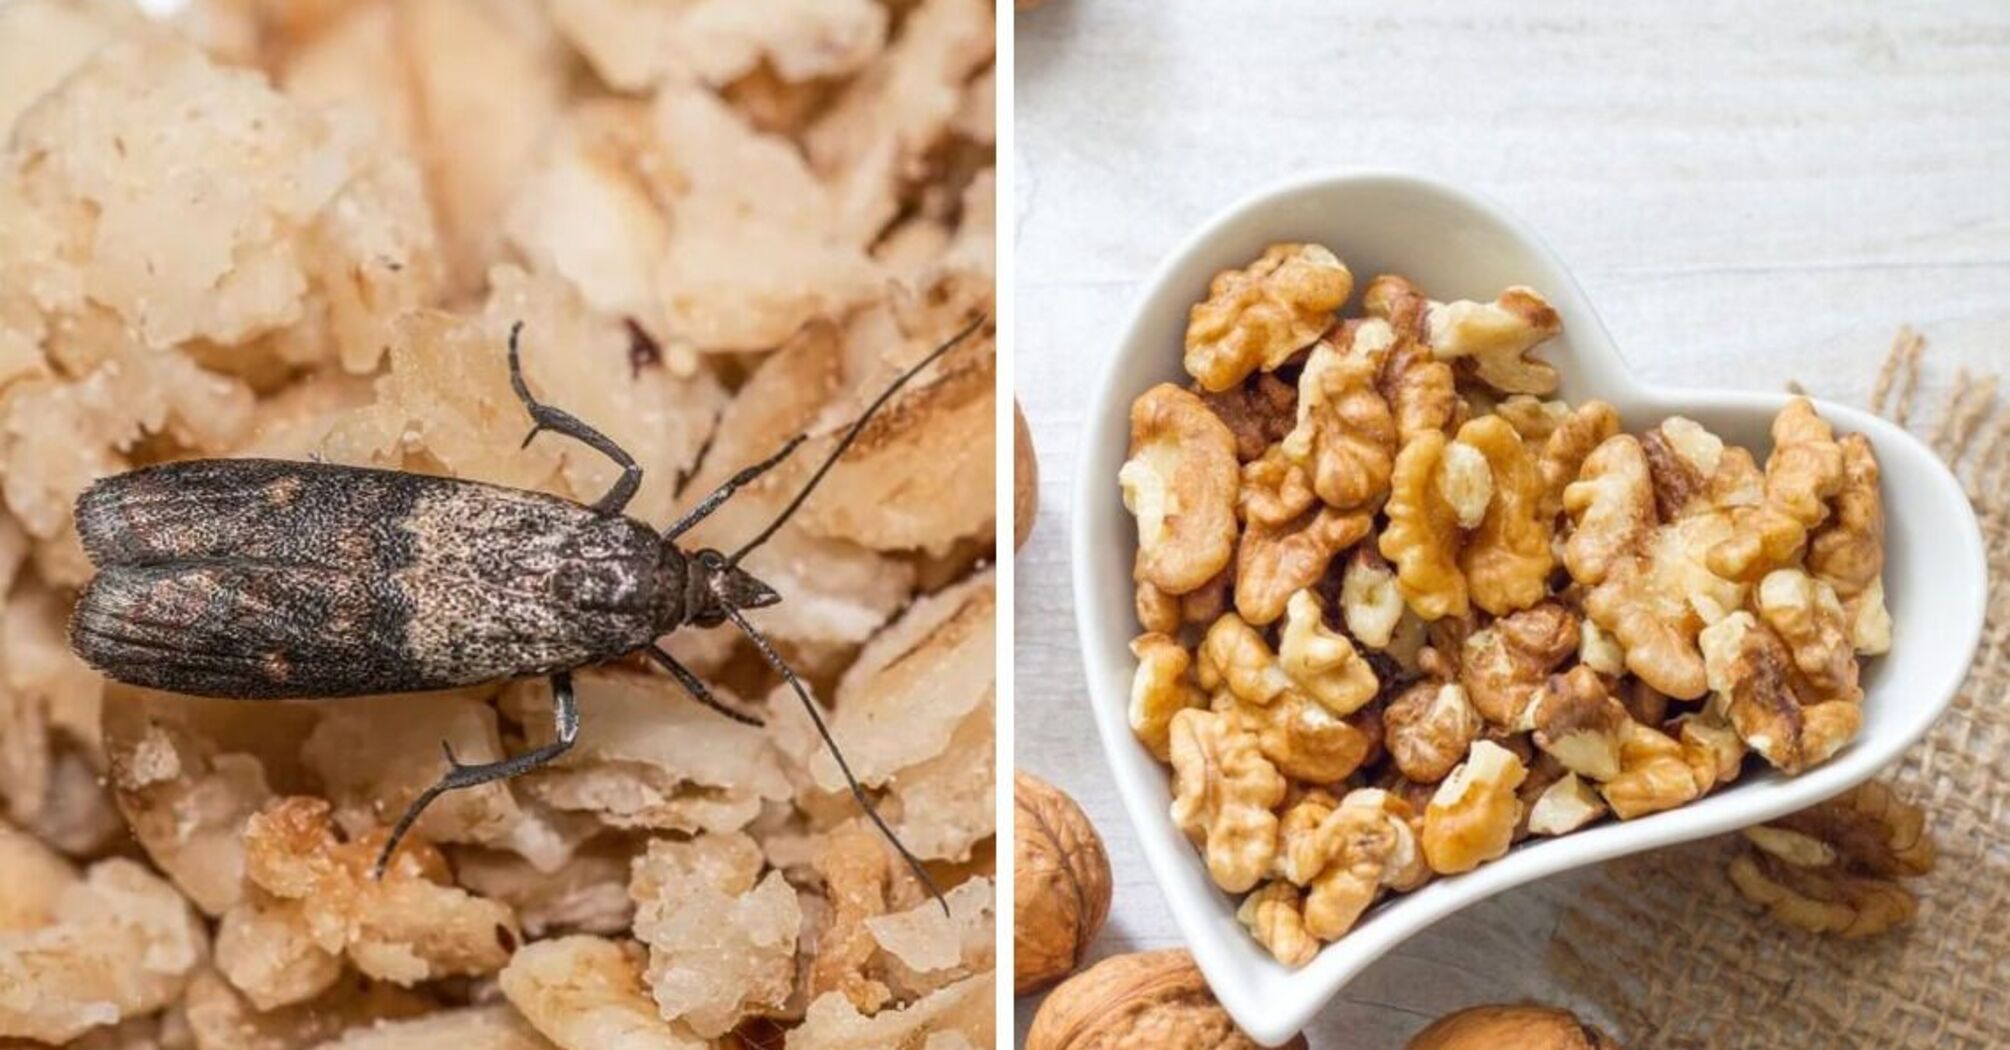 How to store nuts properly to prevent larvae